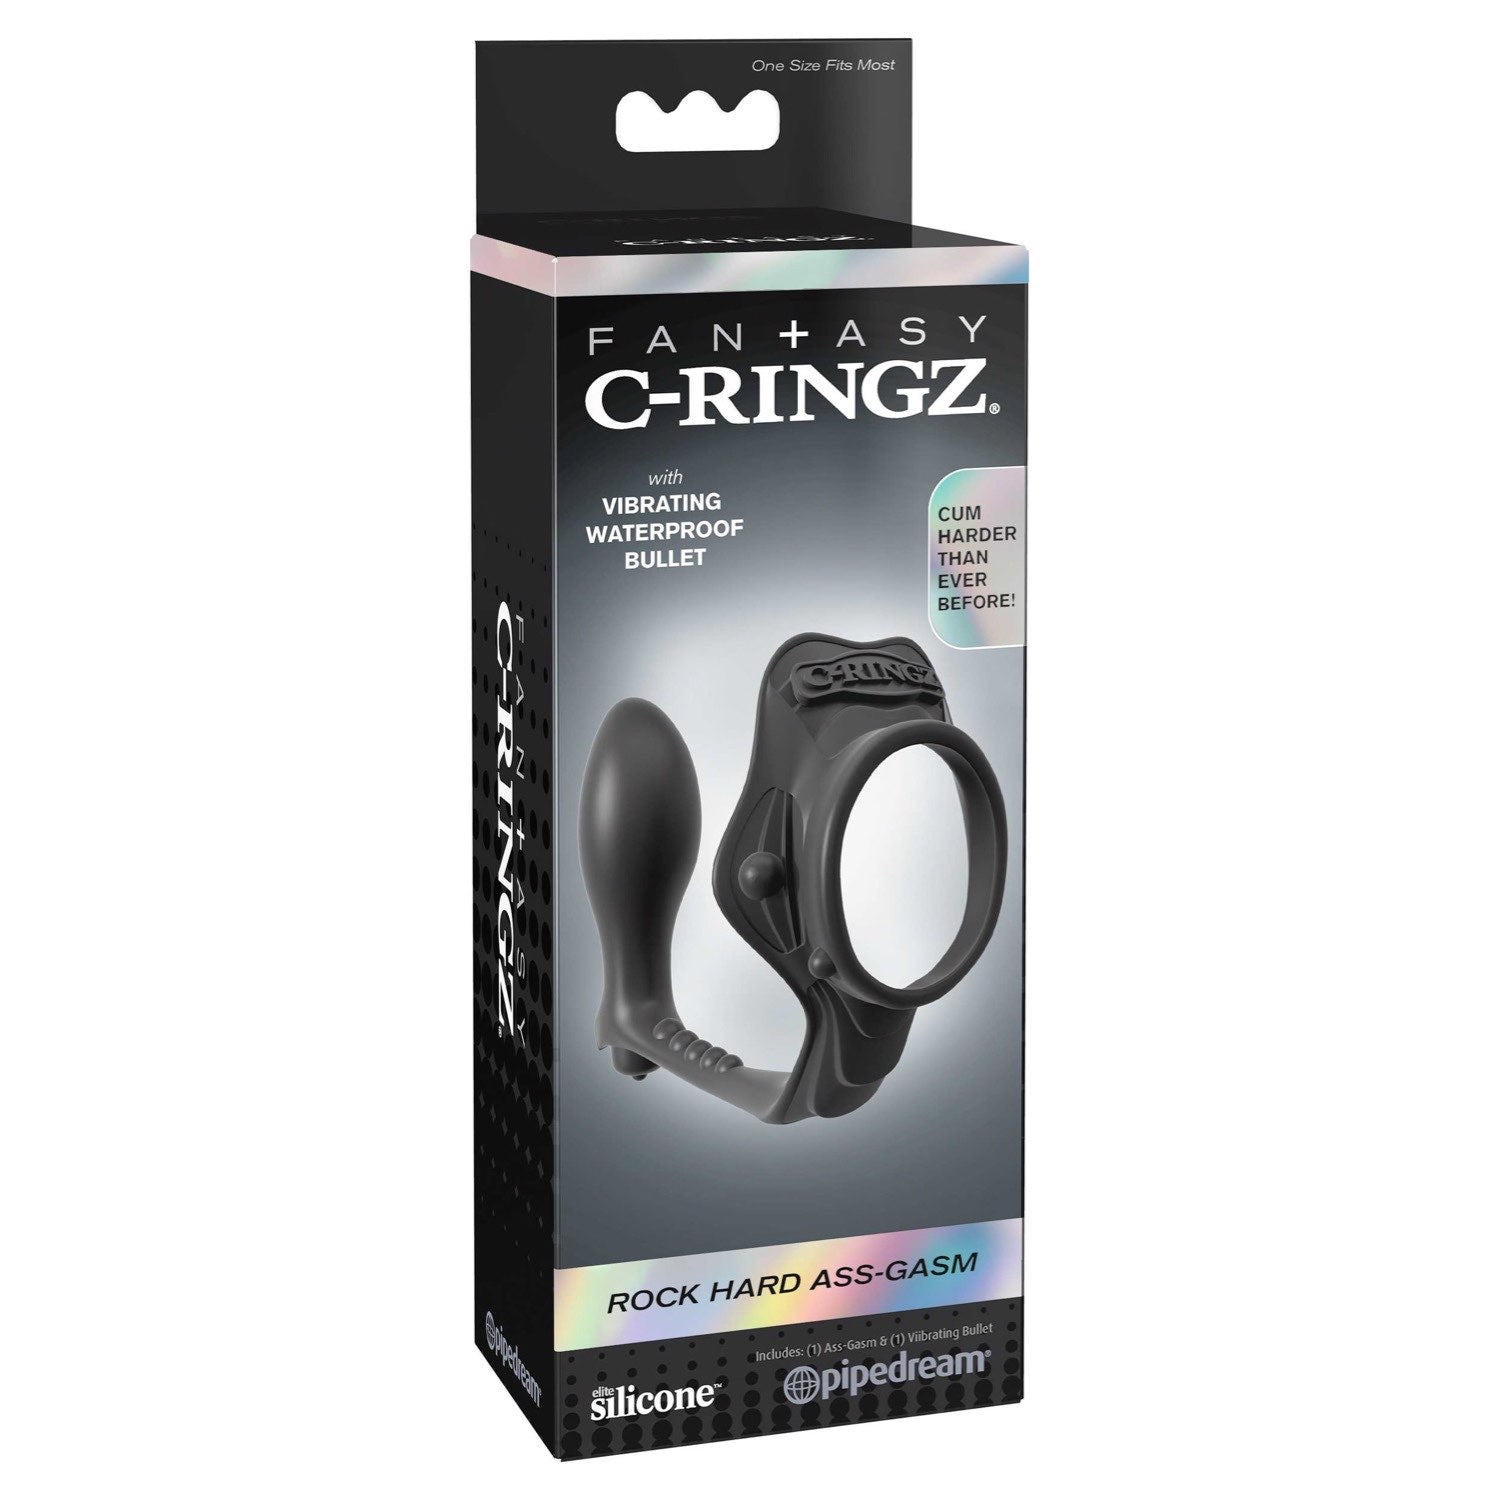 Fantasy C-Ringz Fantasy C-ringz Rock Hard Ass-gasm - Black Cock Ring with Vibrating Anal Plug by Pipedream